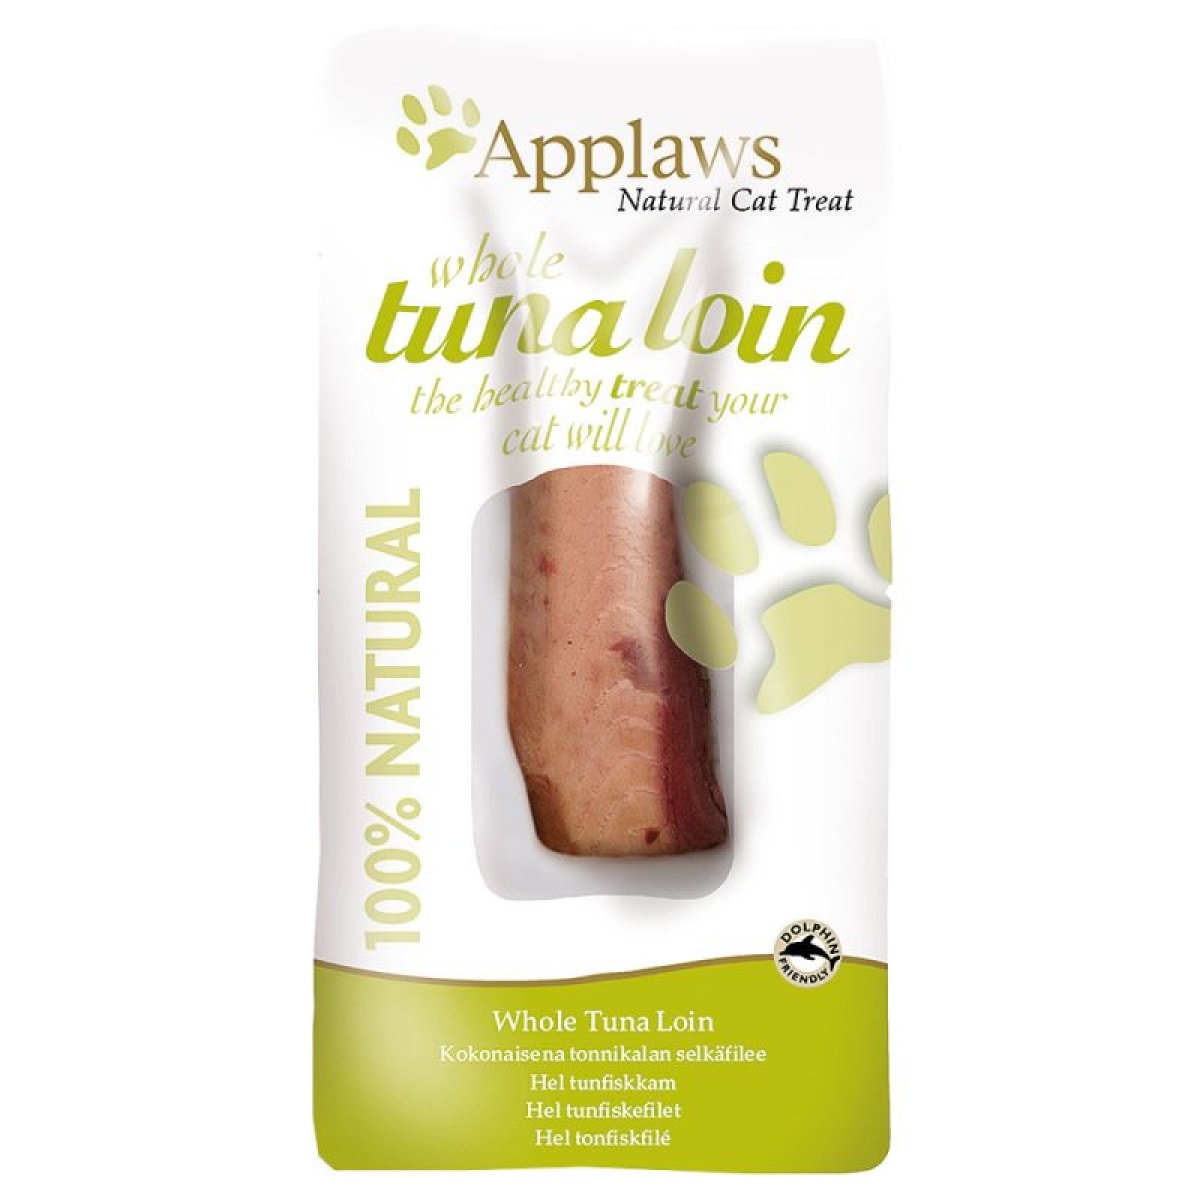 Applaws – Whole Tuna Loin – Pawfect Supplies Ltd Product Image